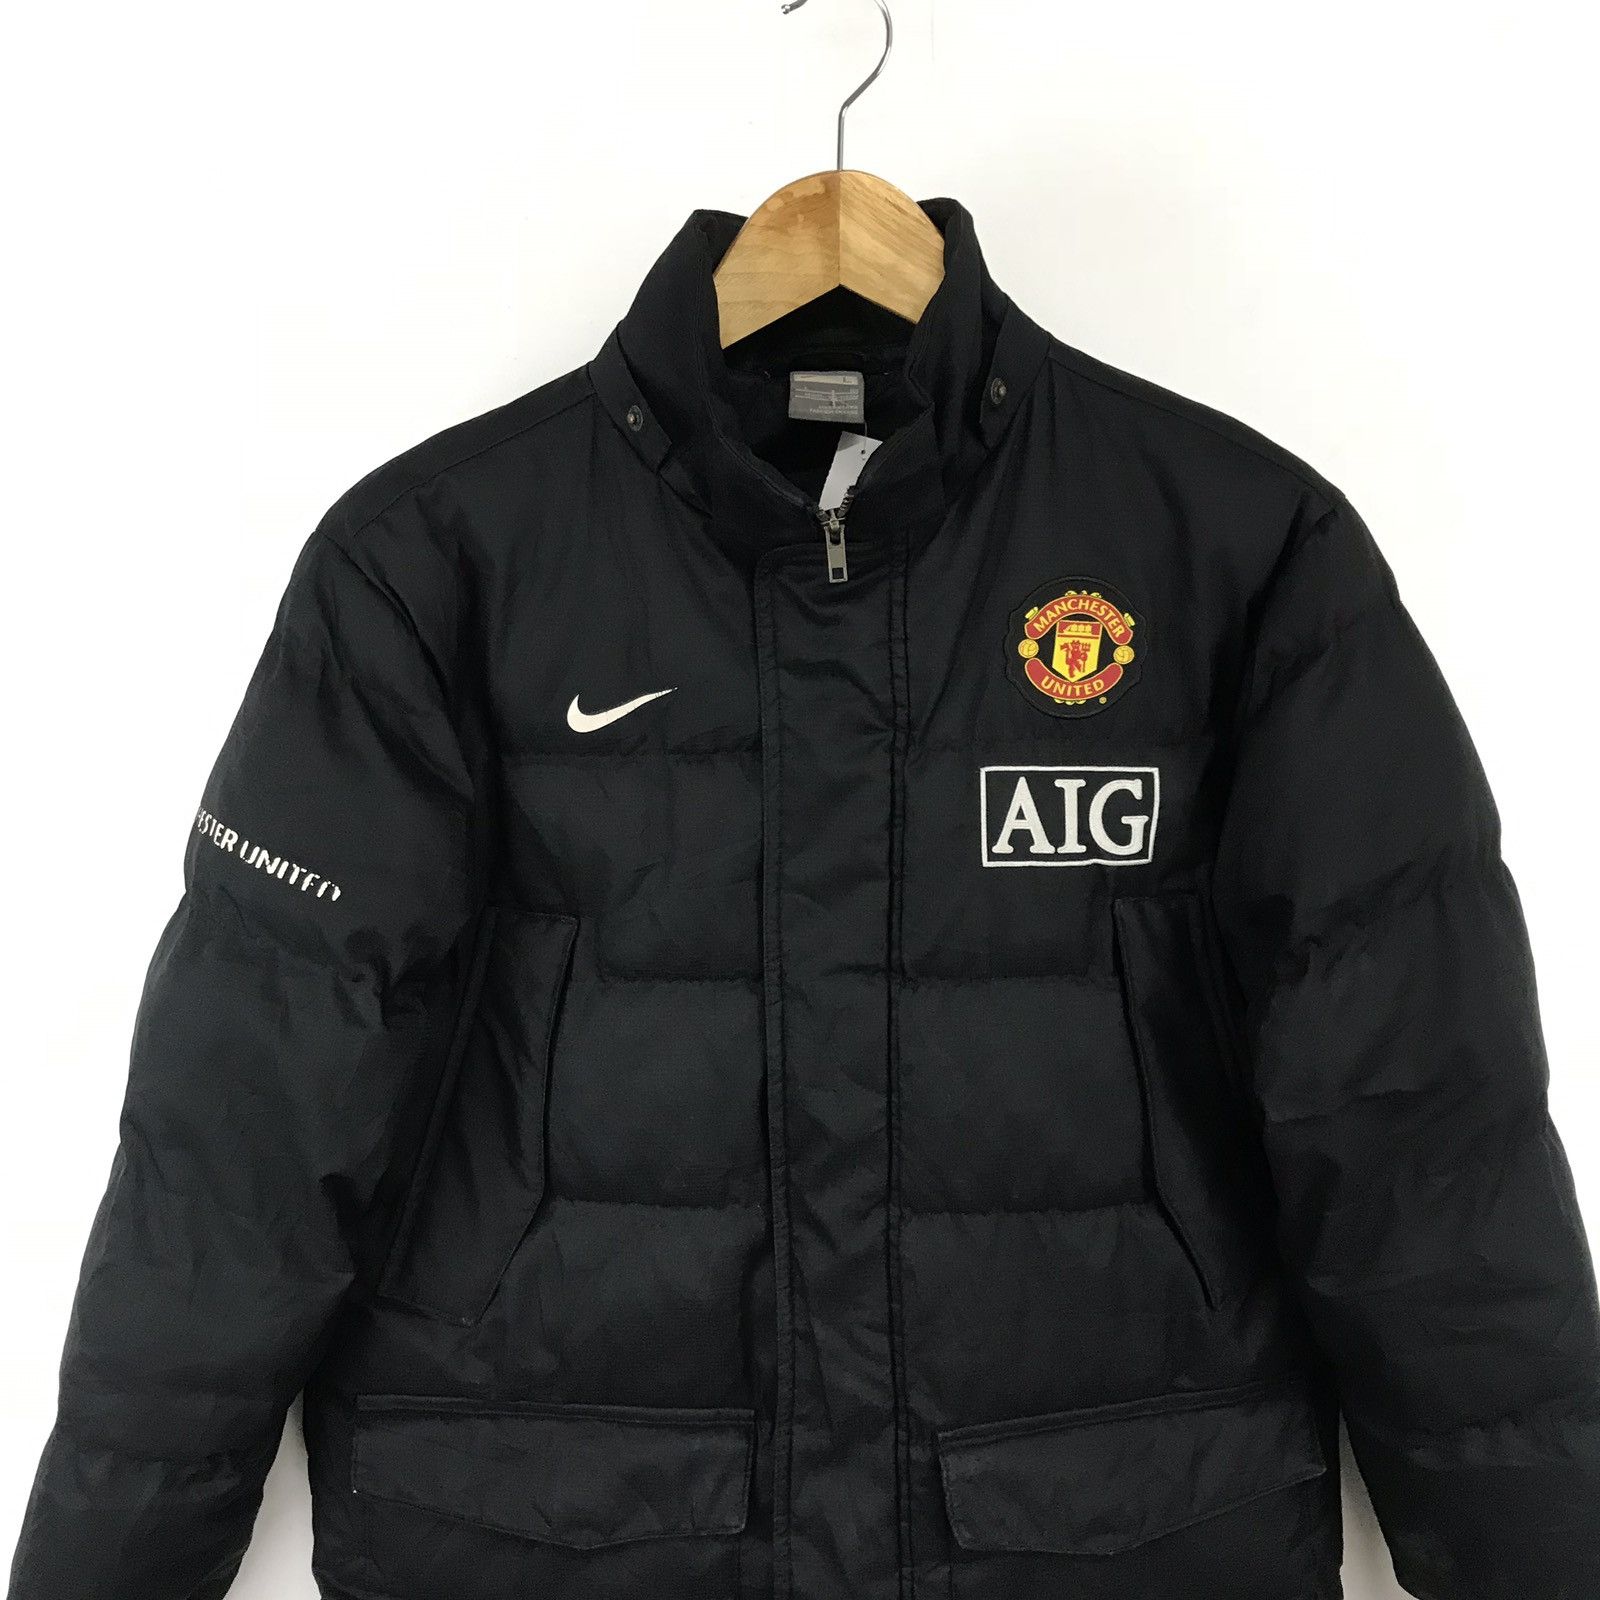 Nike Vintage Manchester United AIG puffer Jacket Size US L / EU 52-54 / 3 - 2 Preview